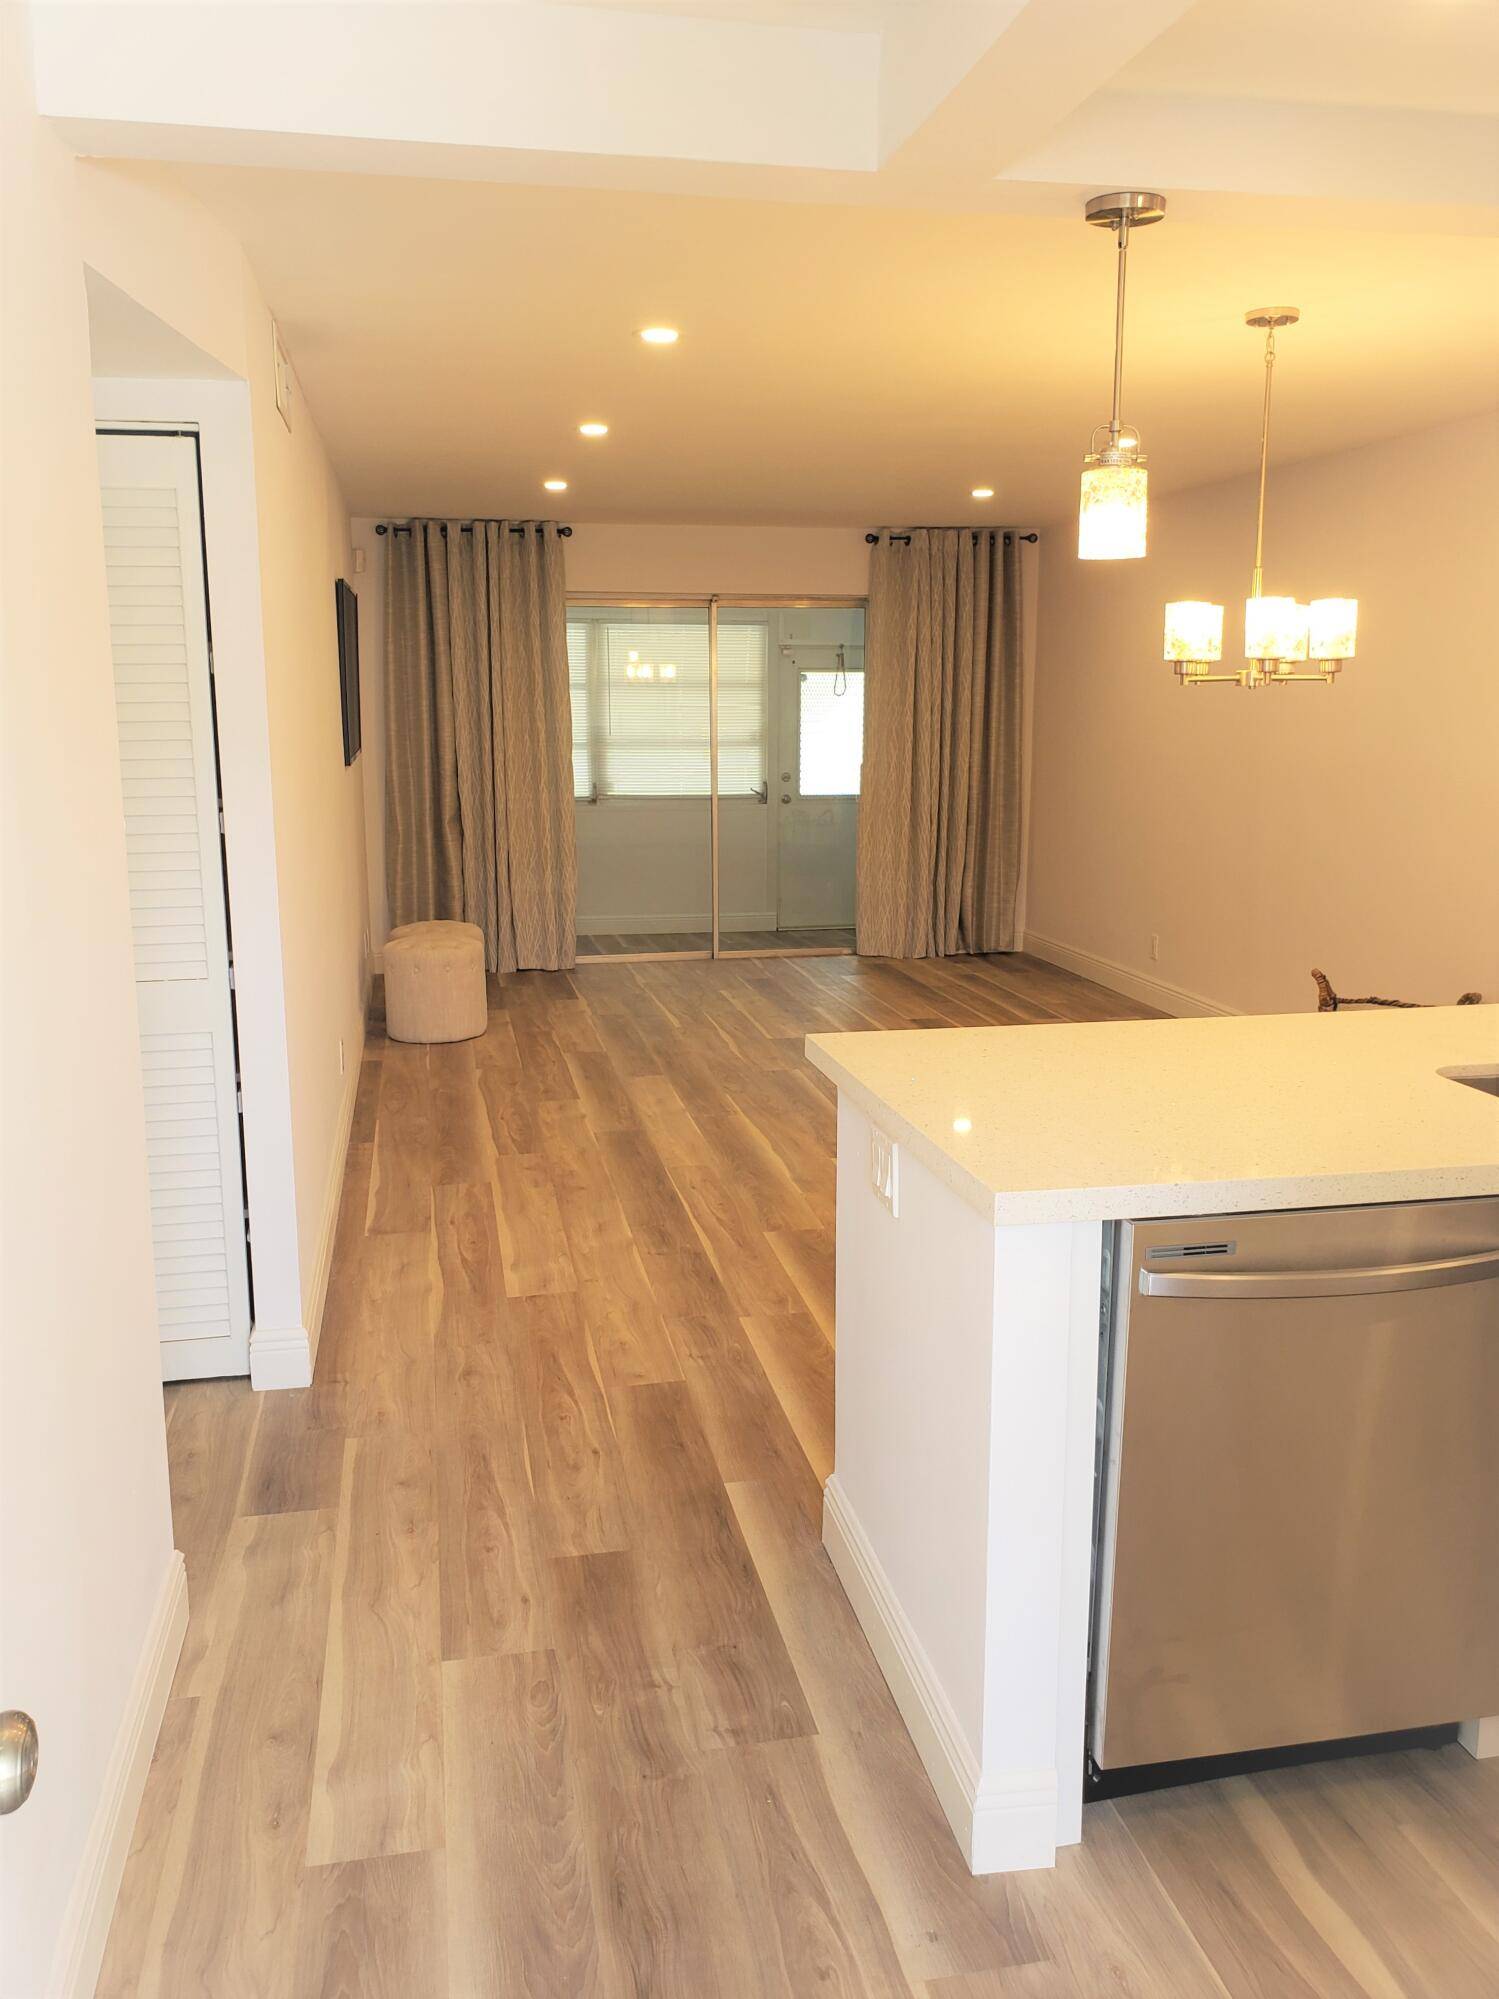 COMPLETELY RENOVATED CONDO WITH IMPACT WINDOWS, JUST A FEW BLOCKS FROM THE BEACH.